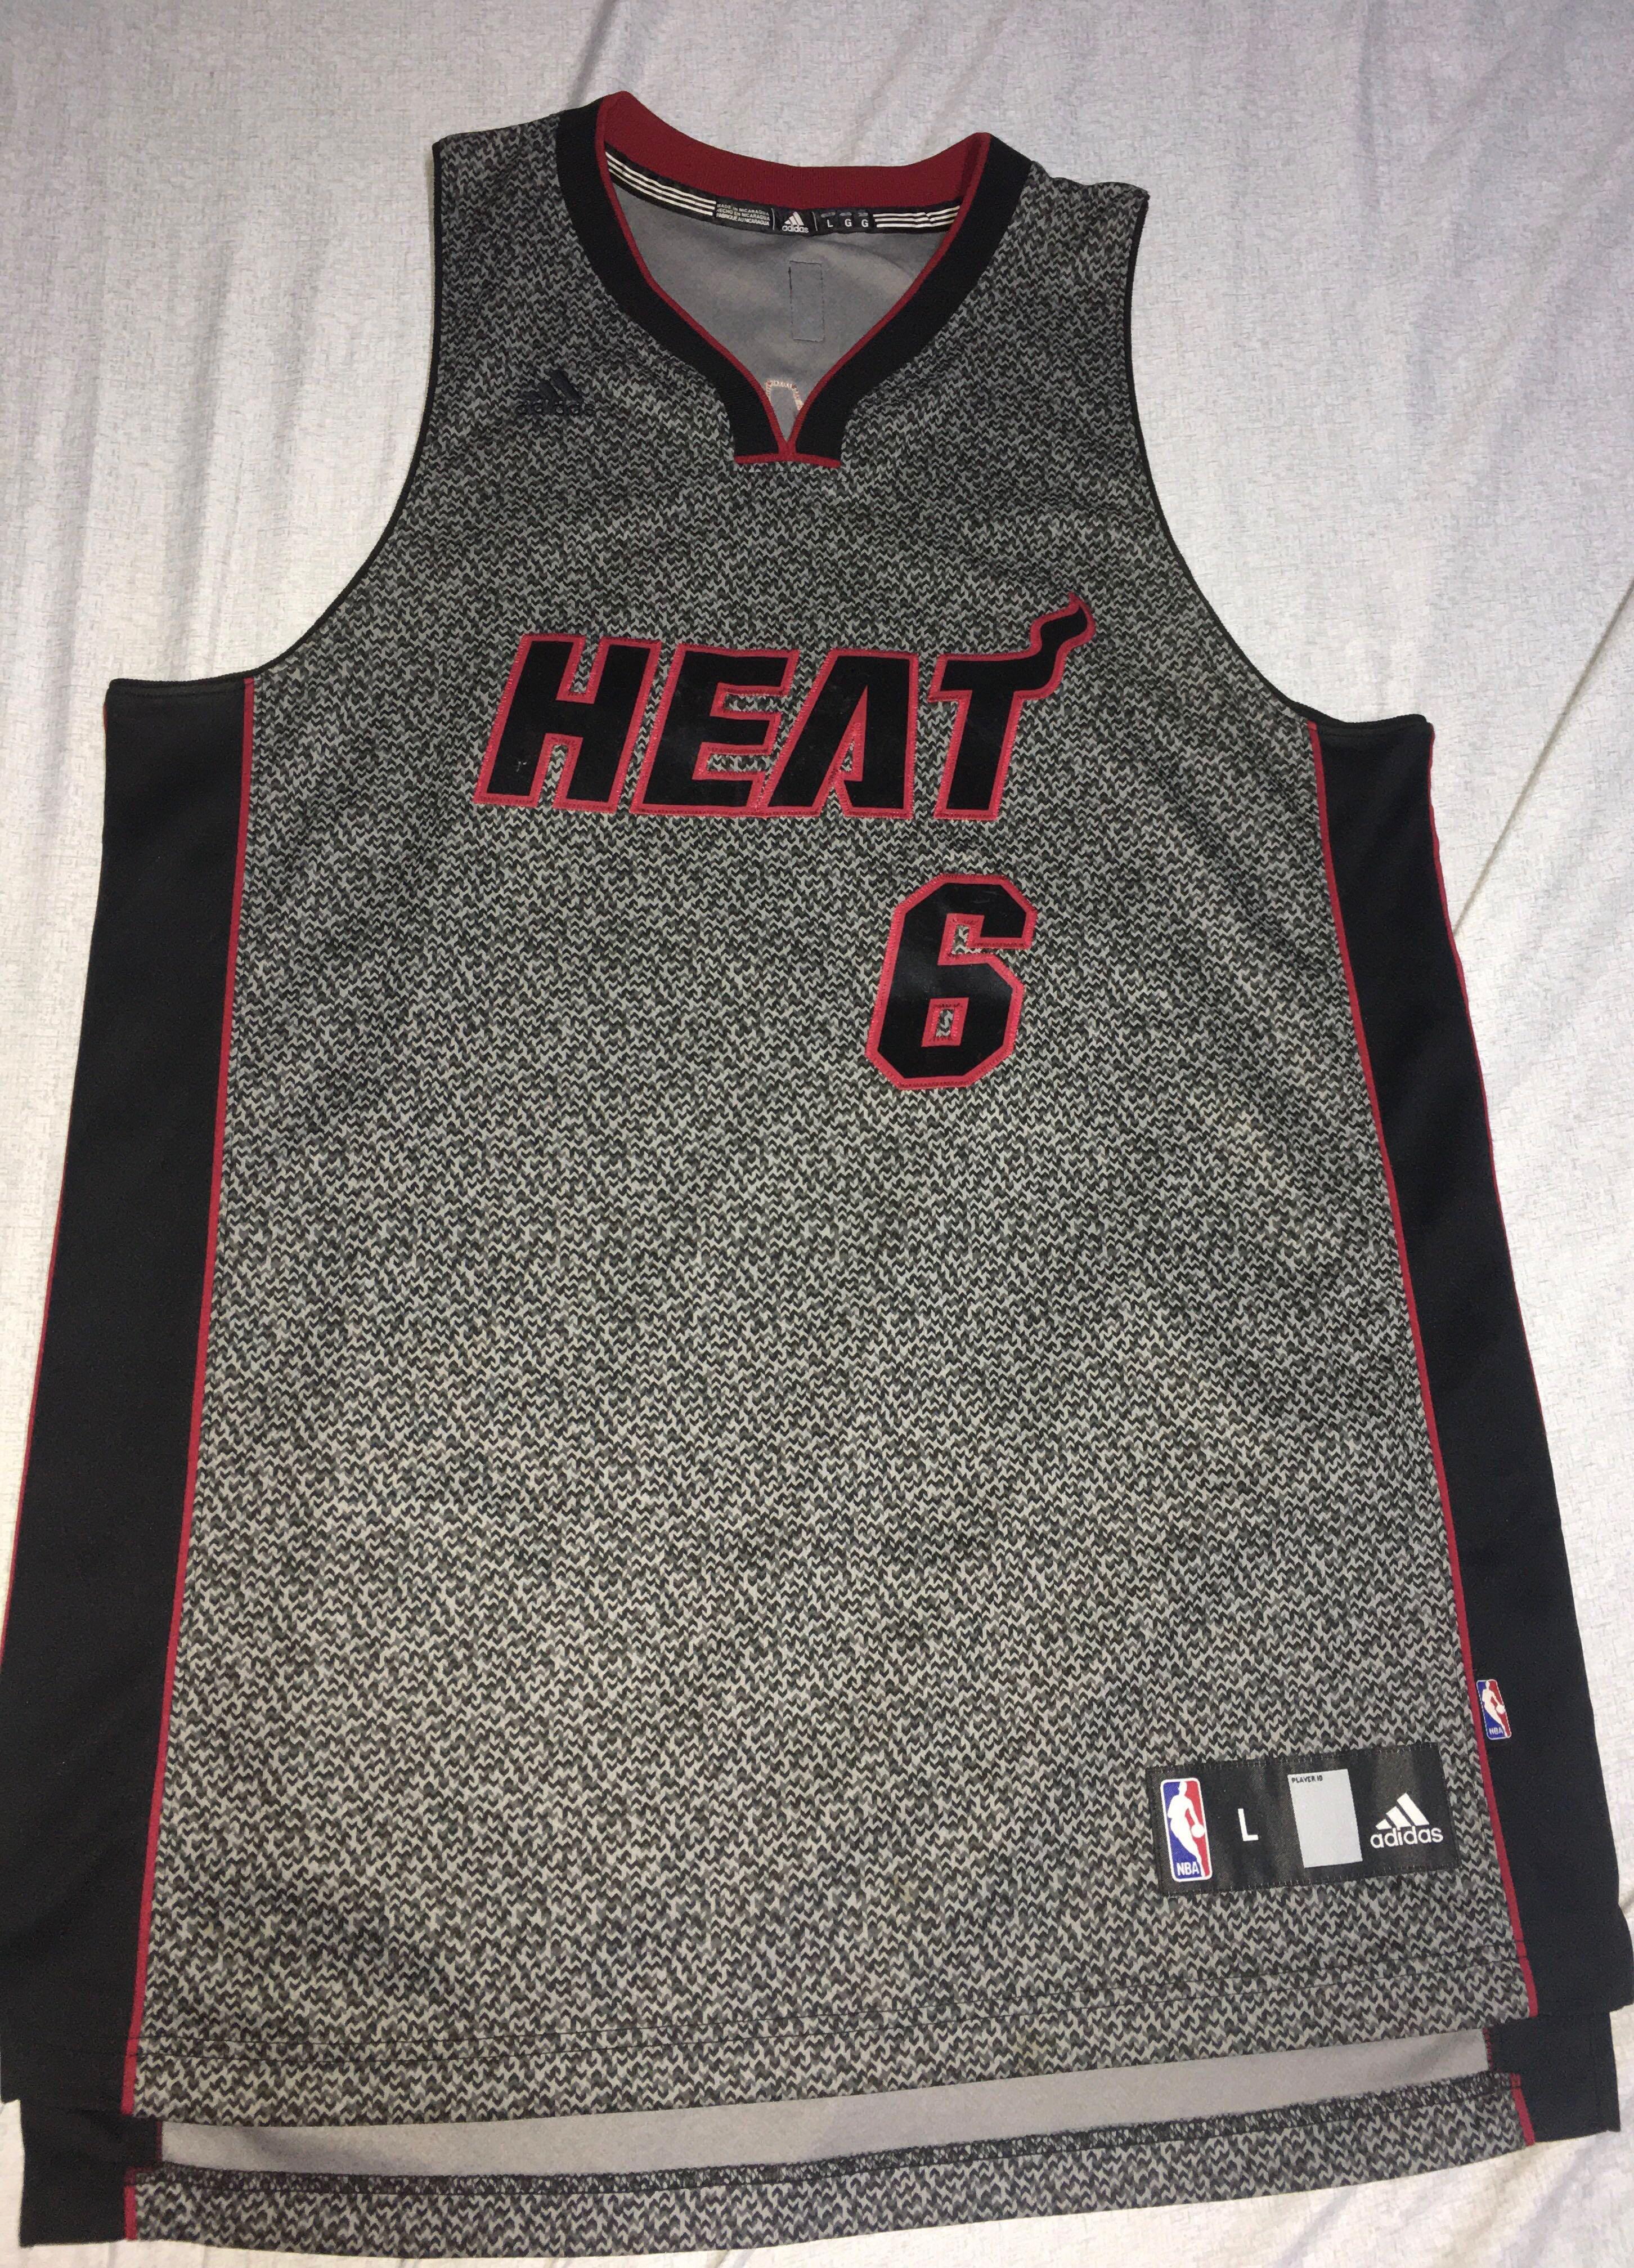 LeBron James Signed Miami Heat Authentic Adidas Red Alternate Jersey